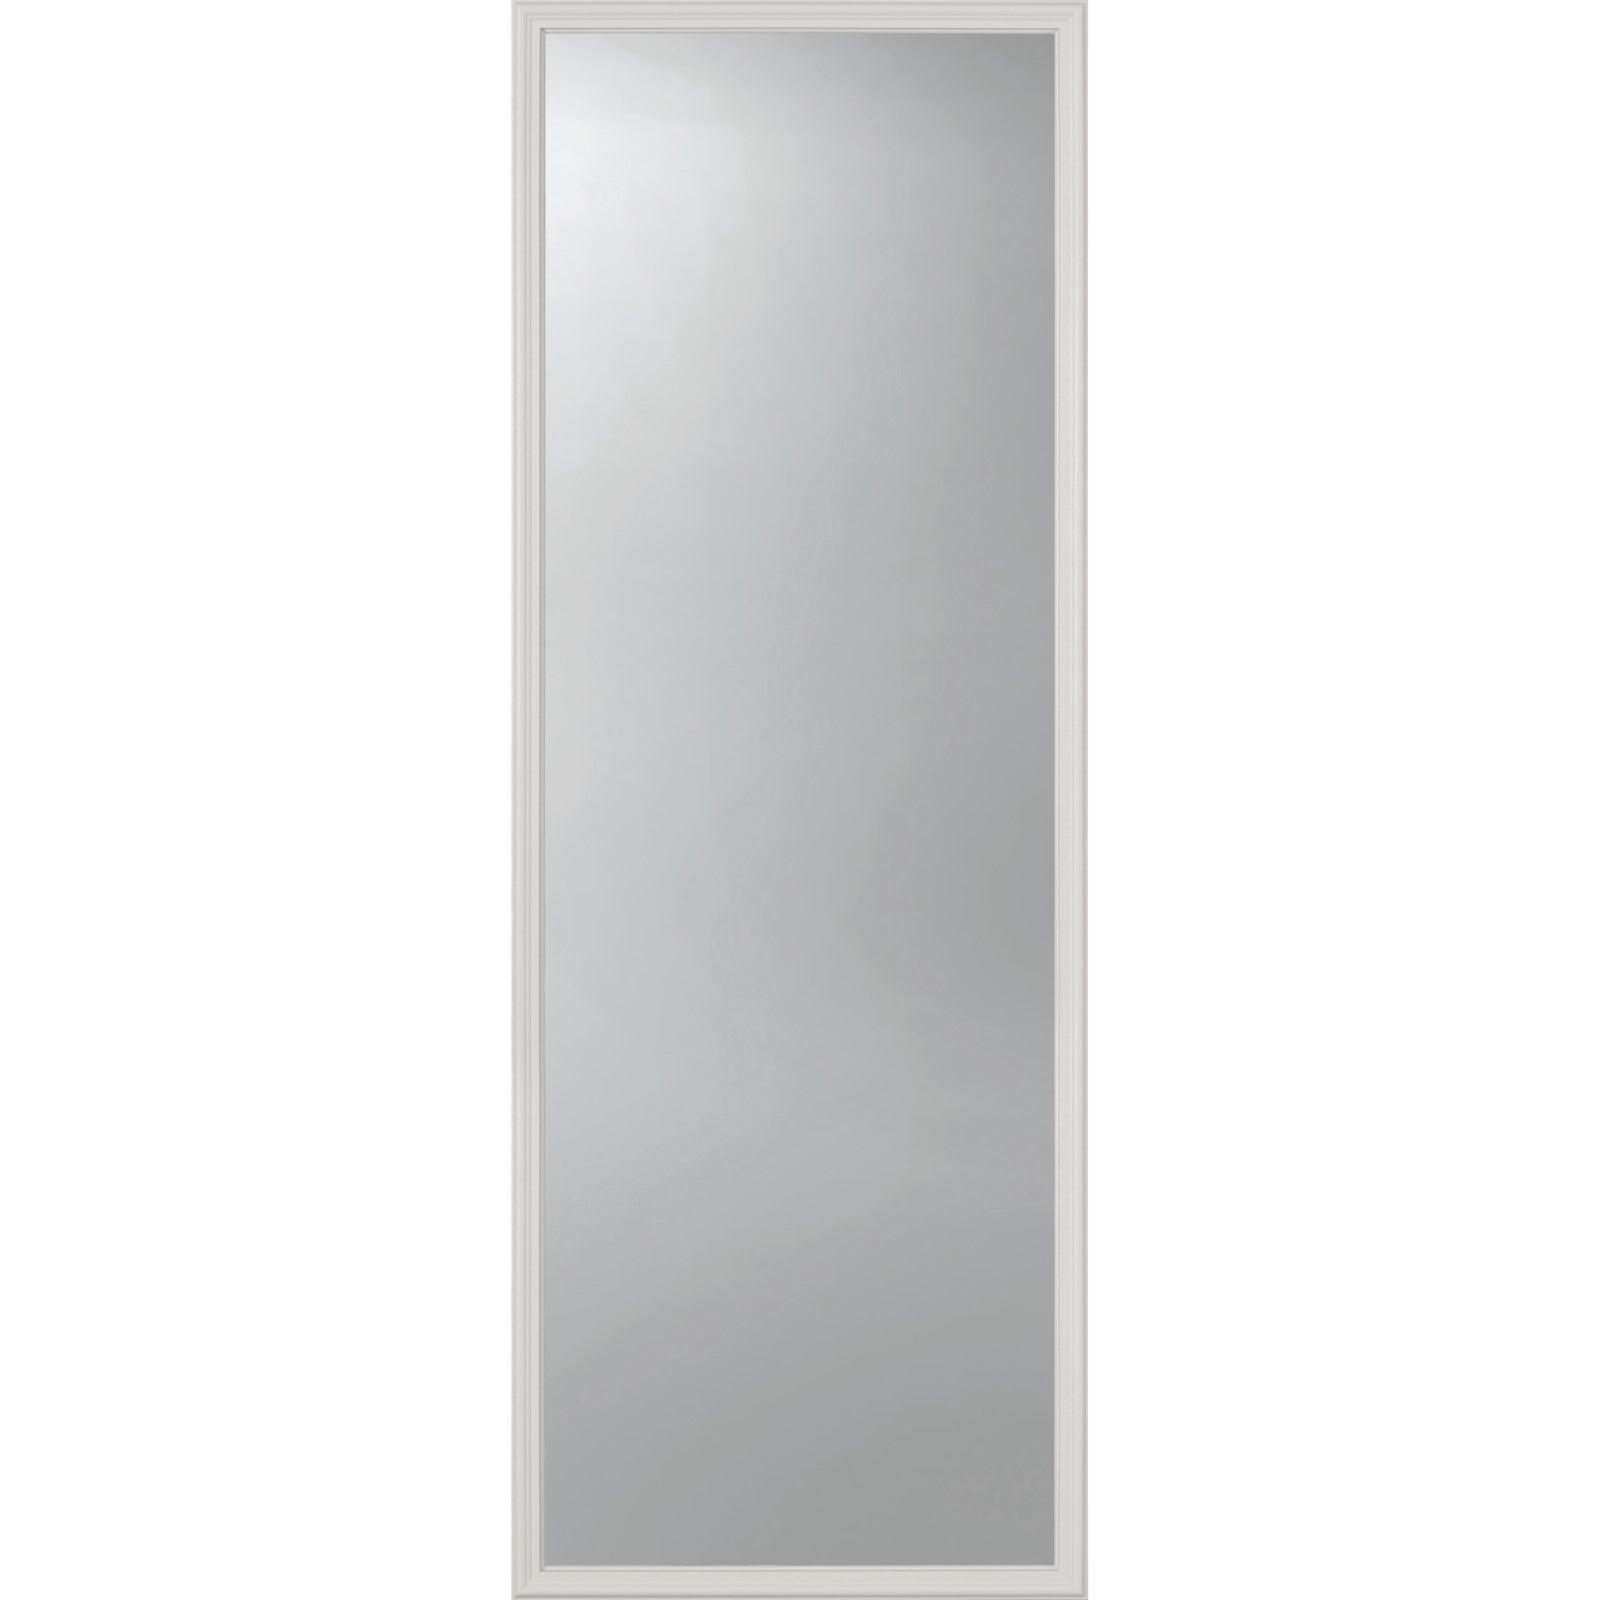 Clear 1 Lite Glass and Frame Kit (Interior 1 3/8" Door Thickness - Full Lite) - Pease Doors: The Door Store